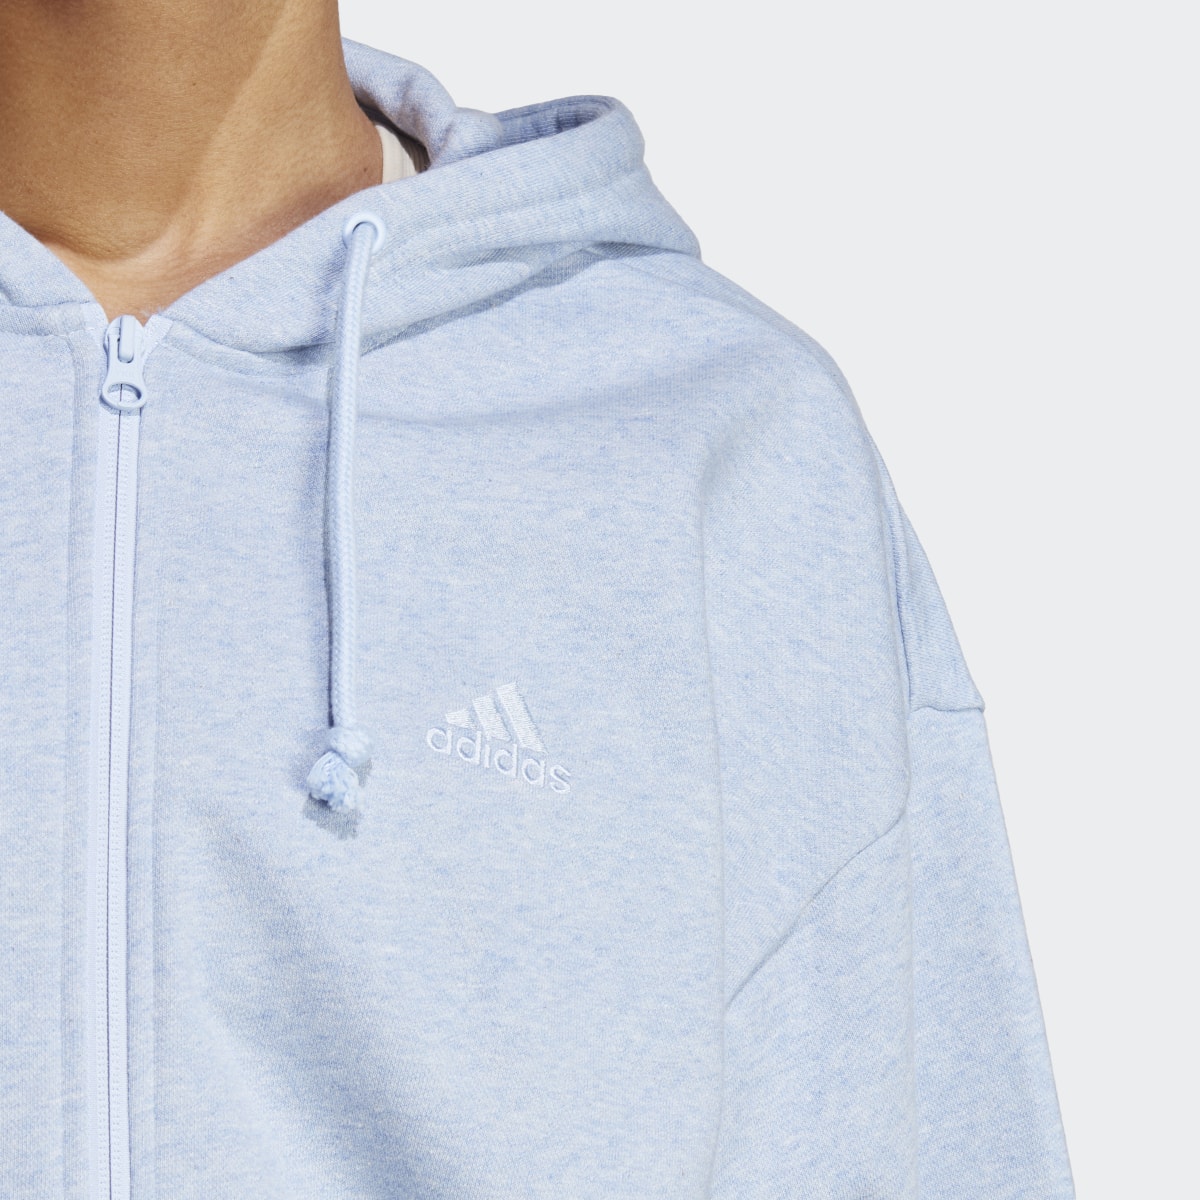 Adidas All SZN French Terry Oversized Full-Zip Hoodie. 6